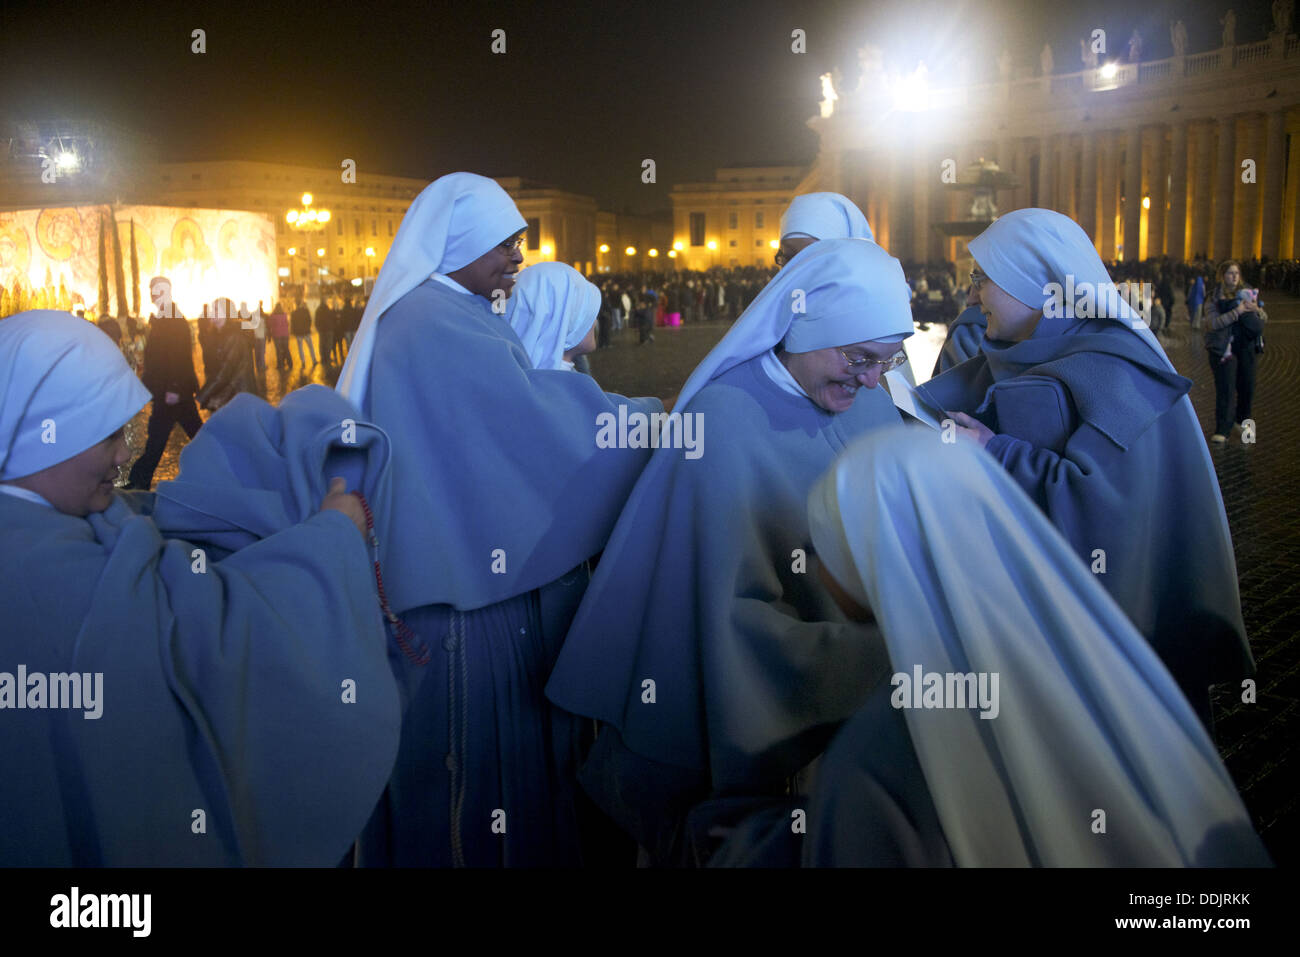 Nuns waiting outside St. Peter's Basilica in Rome for Christmas Eve Mass. Stock Photo